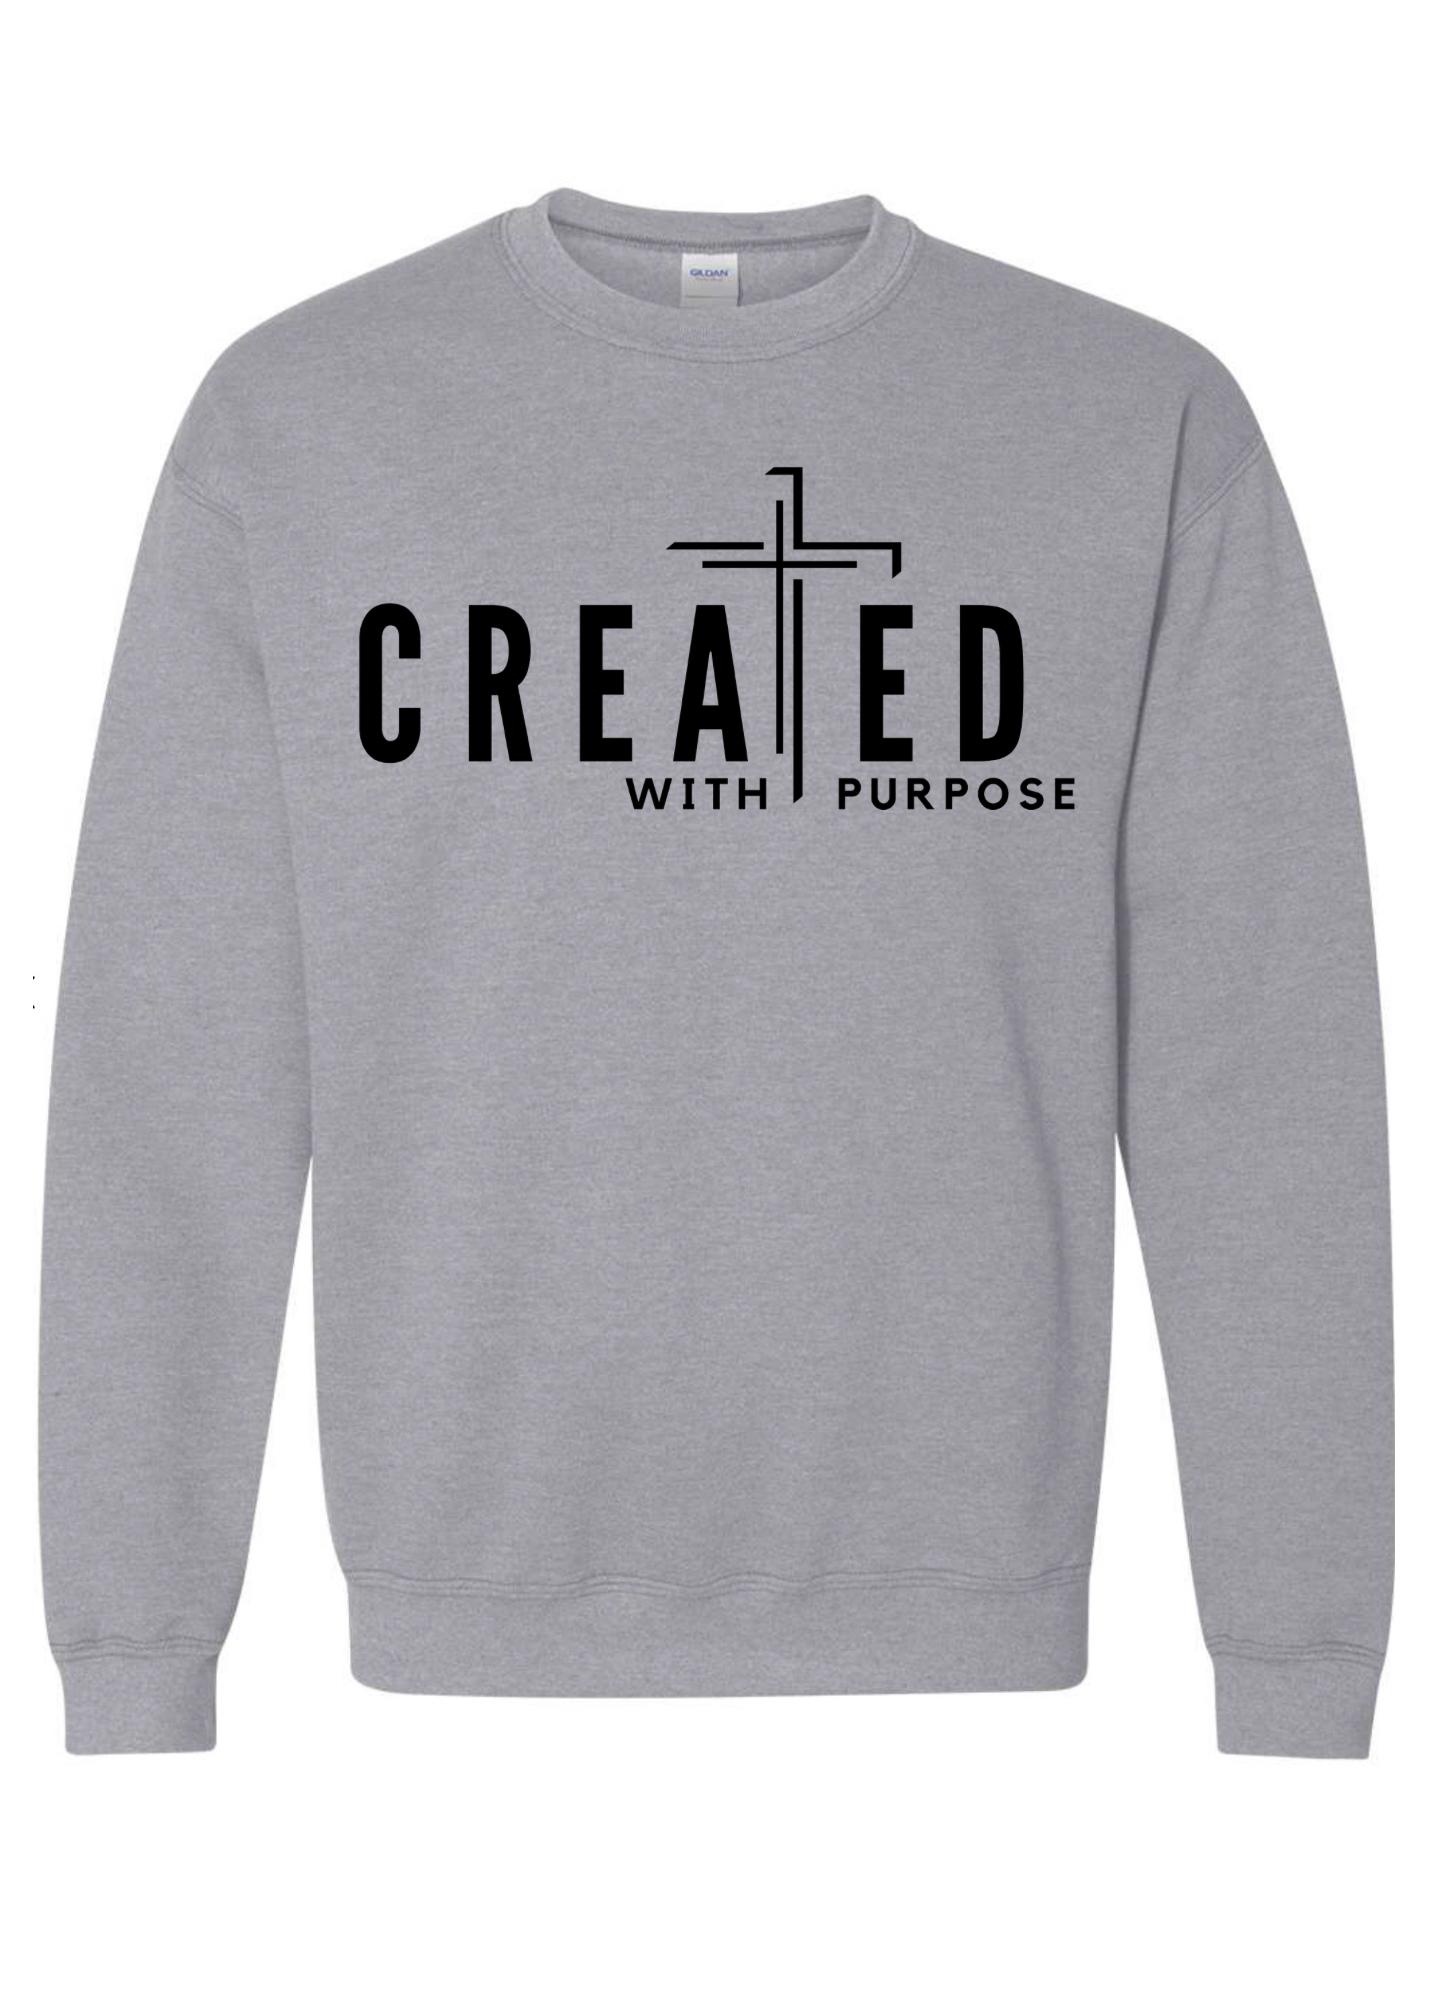 Created With Purpose Crew Sweatshirt - 3 colors available